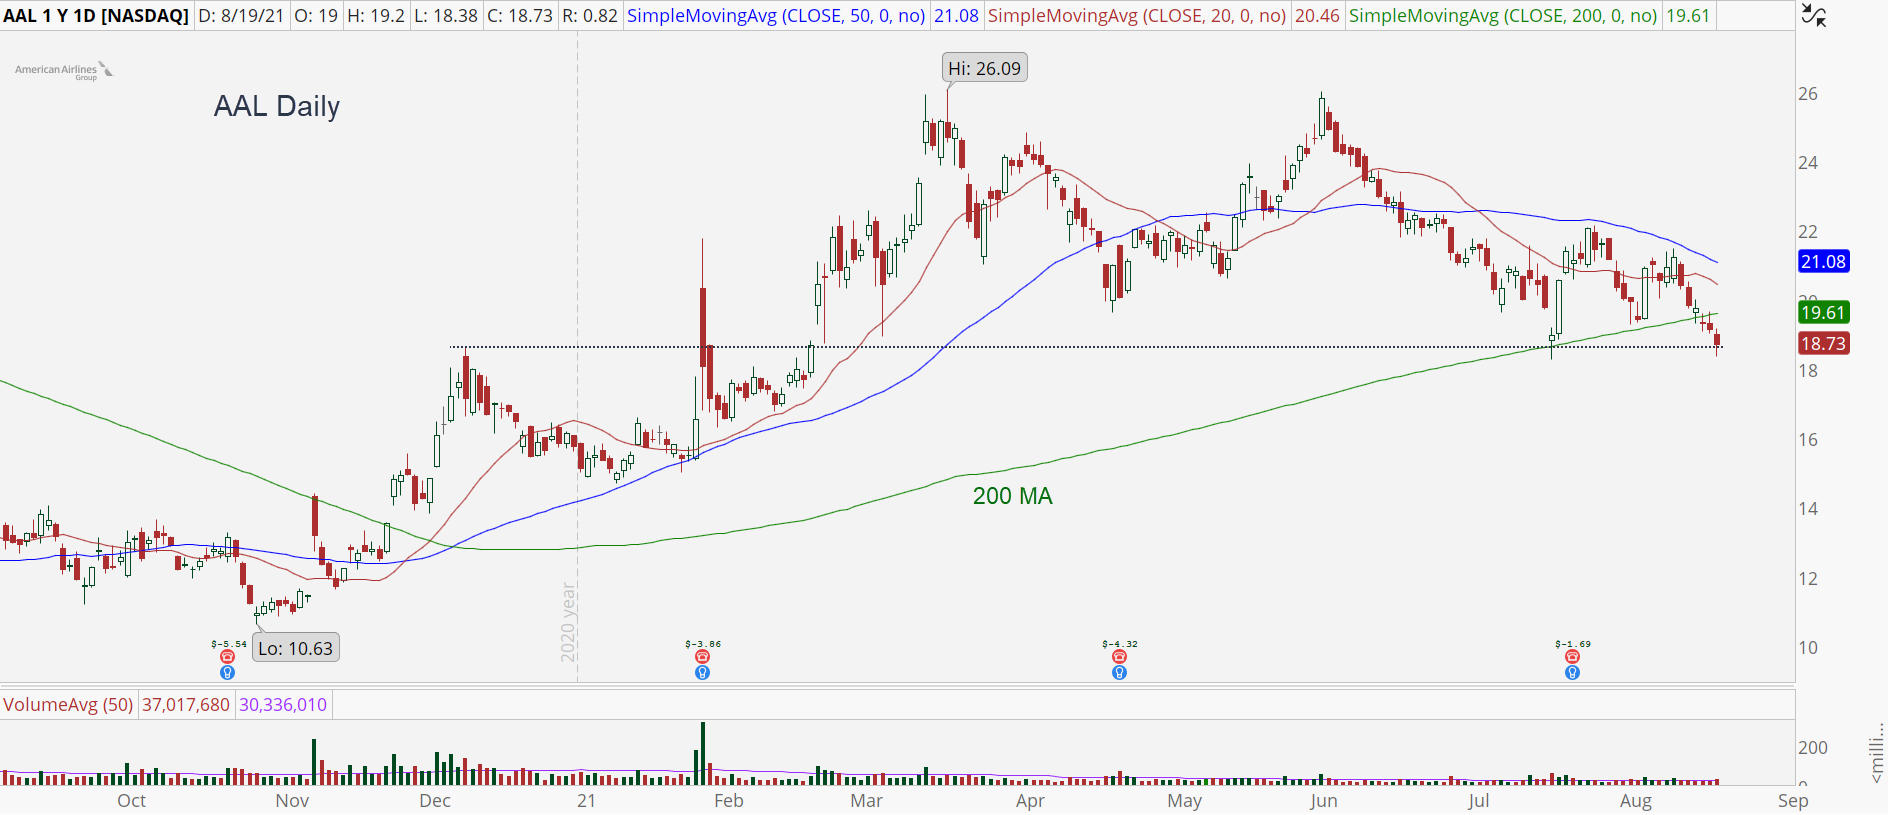 American Airlines (AAL) daily chart with break of 200 MA